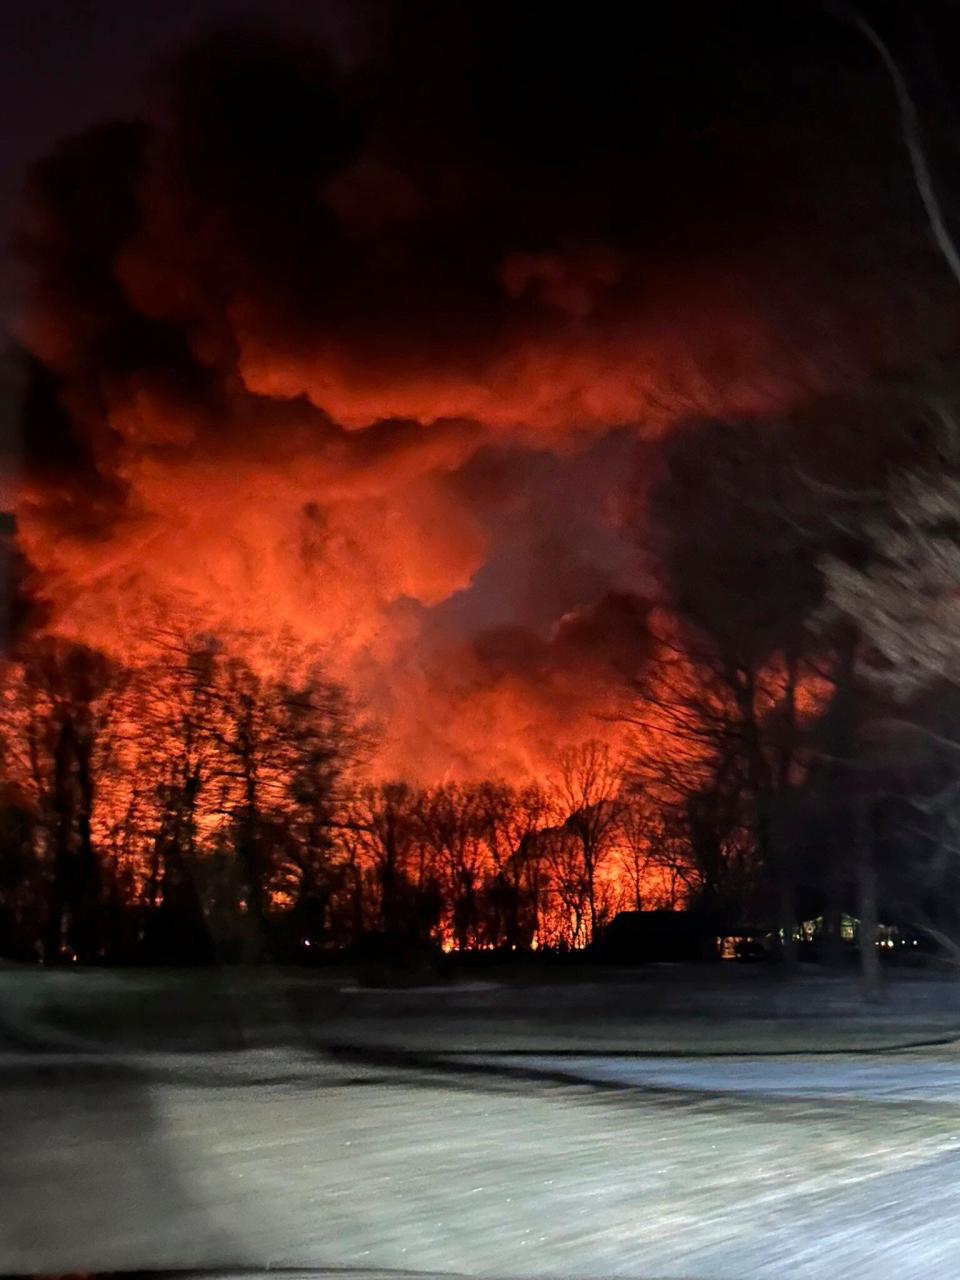 In this photo provided by Melissa Smith, a train fire is seen from her farm in East Palestine, Ohio, Feb. 3, 2023. A train derailment and resulting large fire prompted an evacuation order in the Ohio village near the Pennsylvania state line.